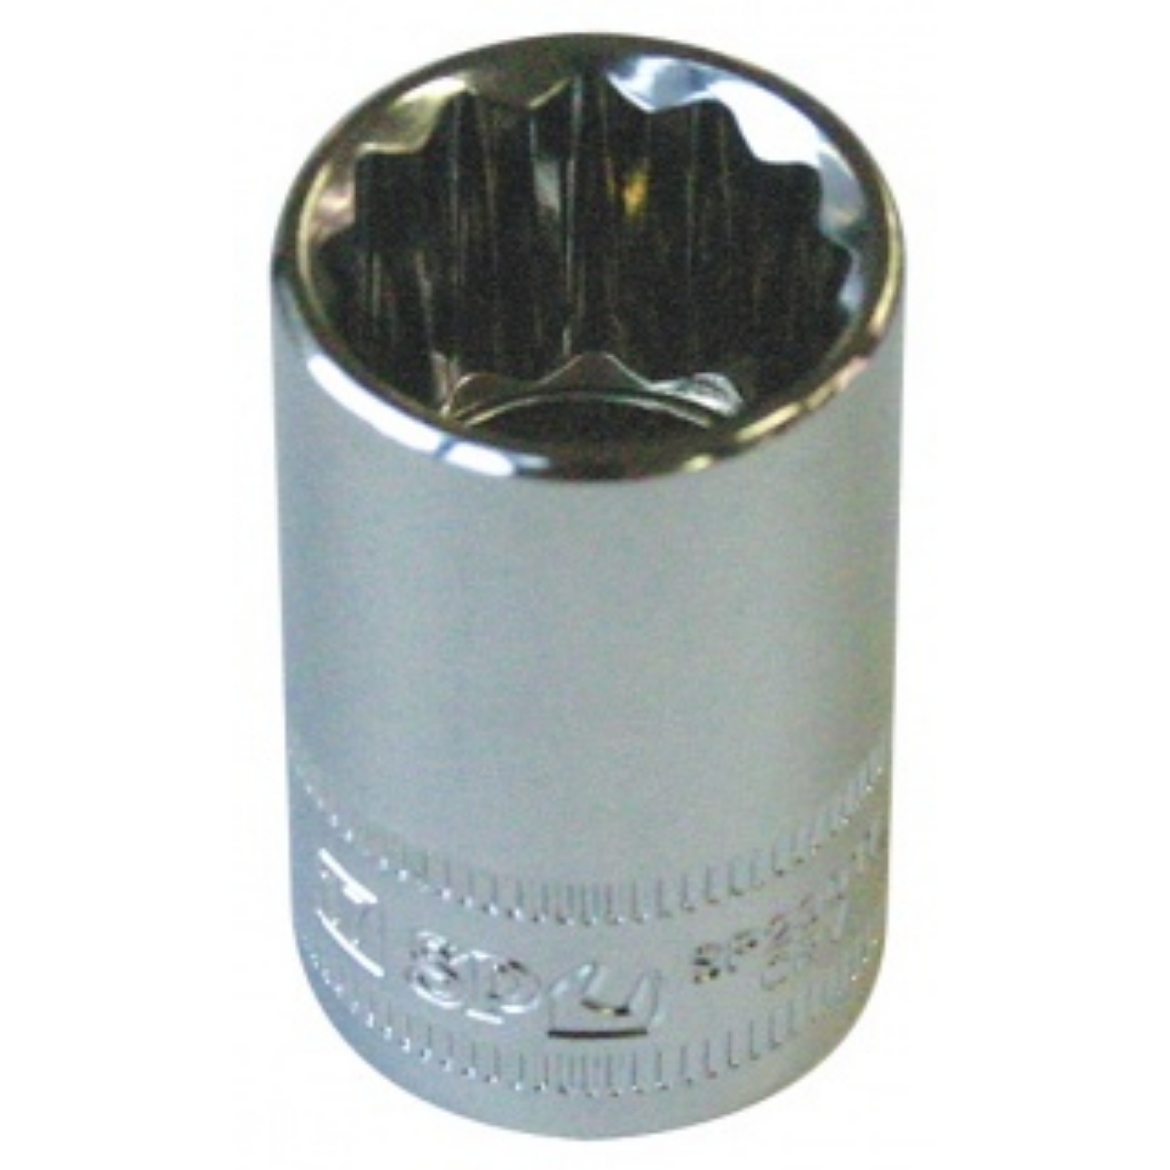 Picture of SOCKET 1/2"DR 12PT METRIC 23MM SP TOOLS